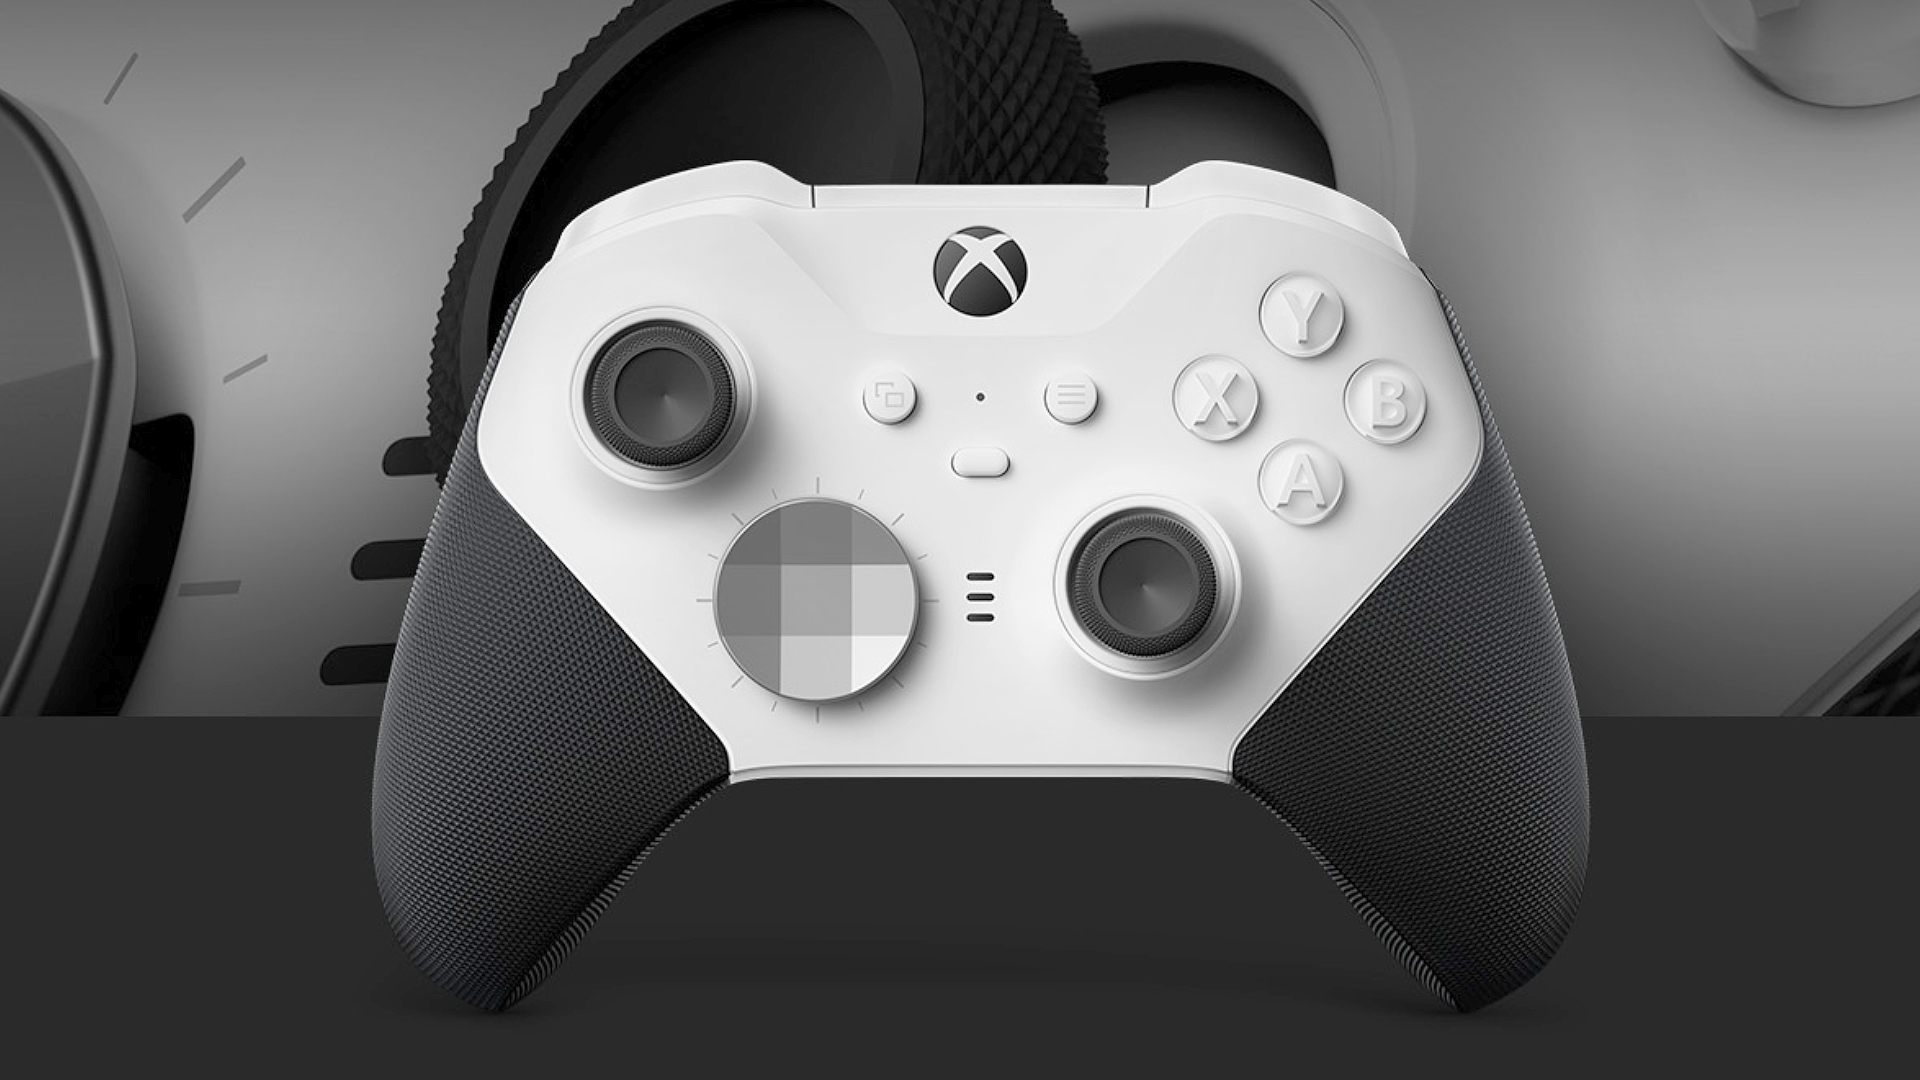 There’s now a cheaper Xbox Pro controller for your gaming PC